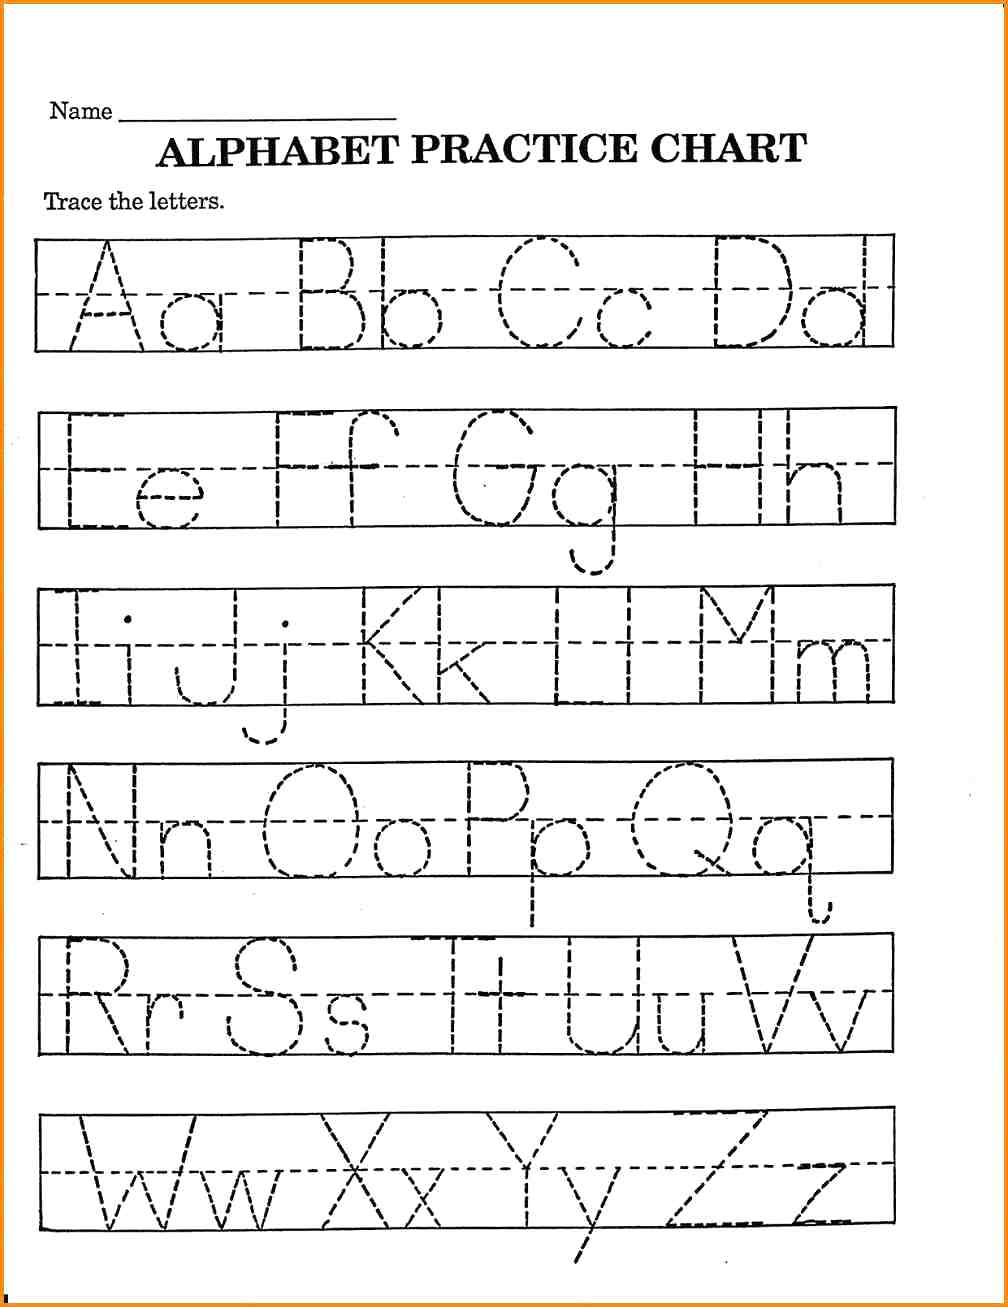 Worksheets Pdf For Western Alphabet Writing Practices within Alphabet Tracing Sheet Pdf